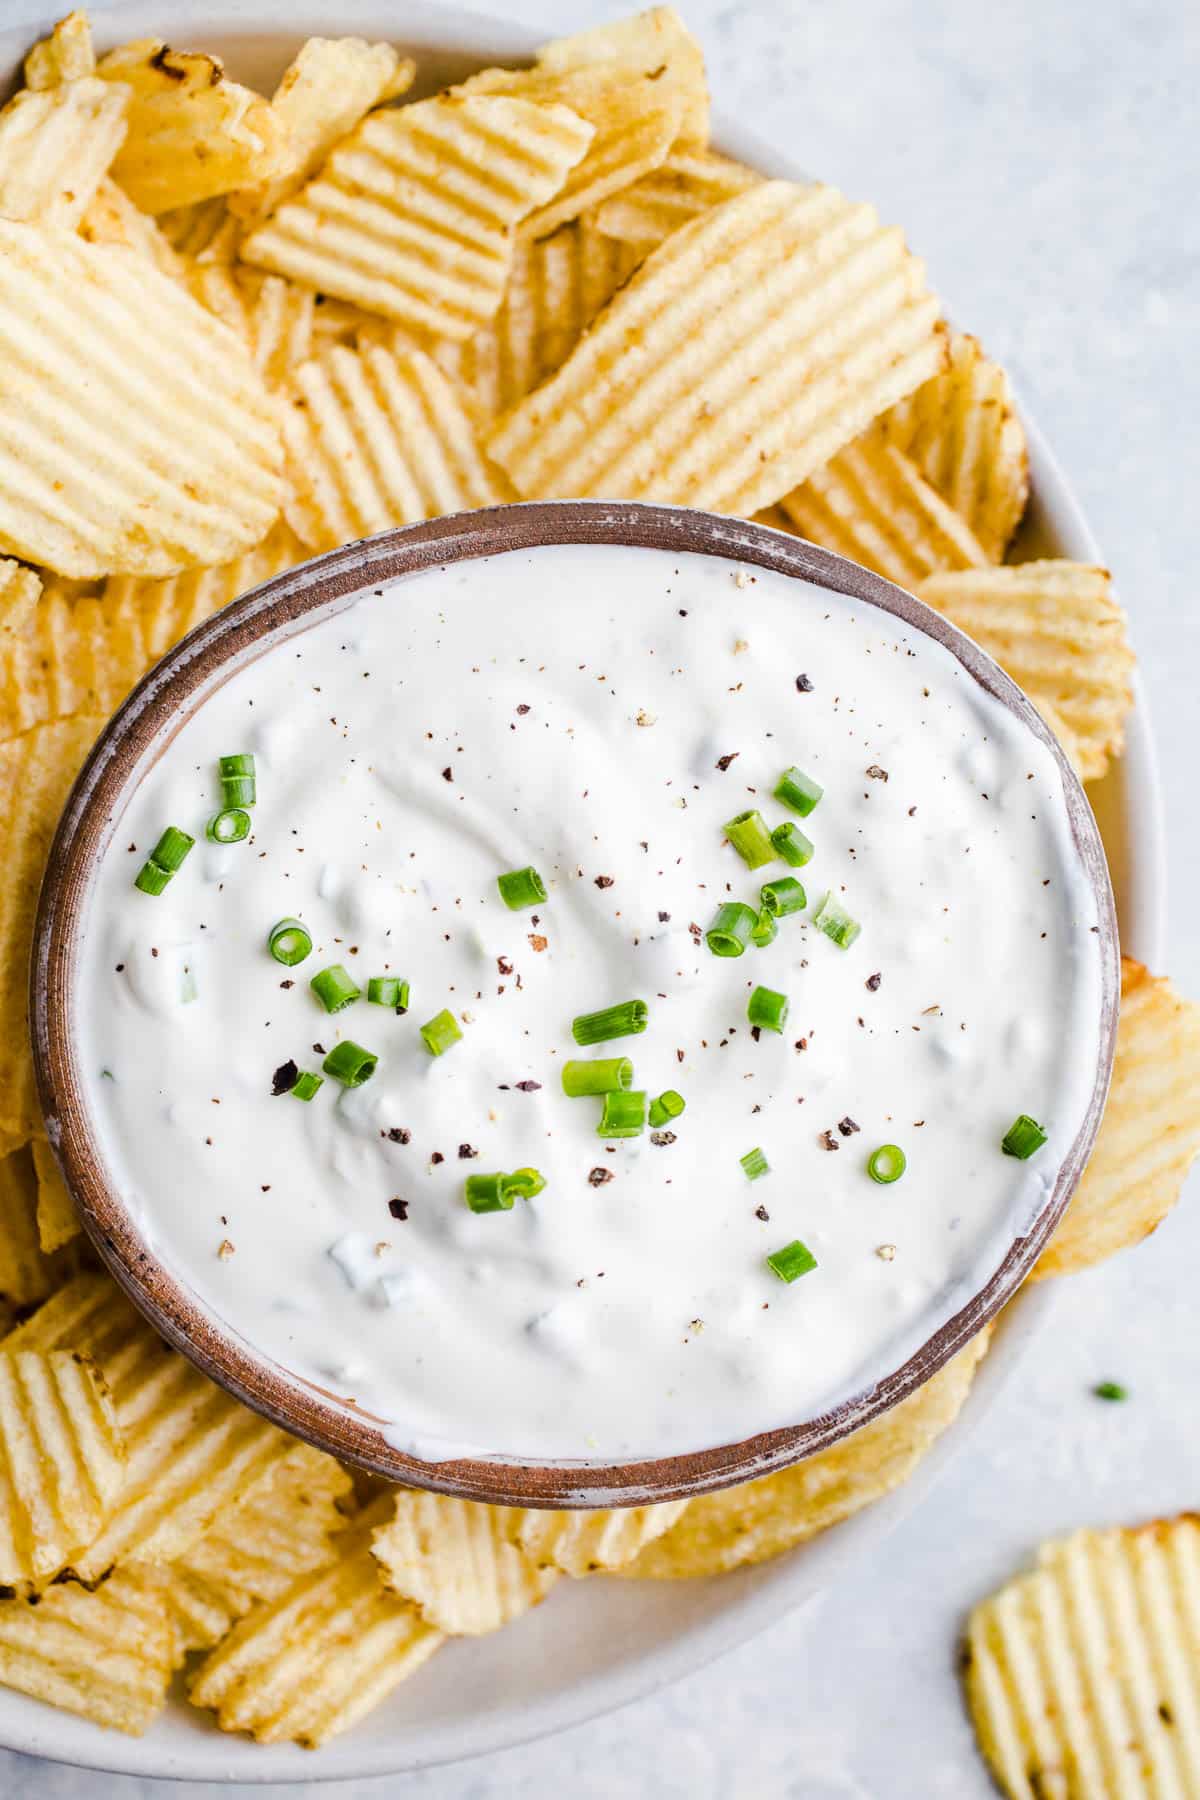 Creamy dip on a platter with potato chips.